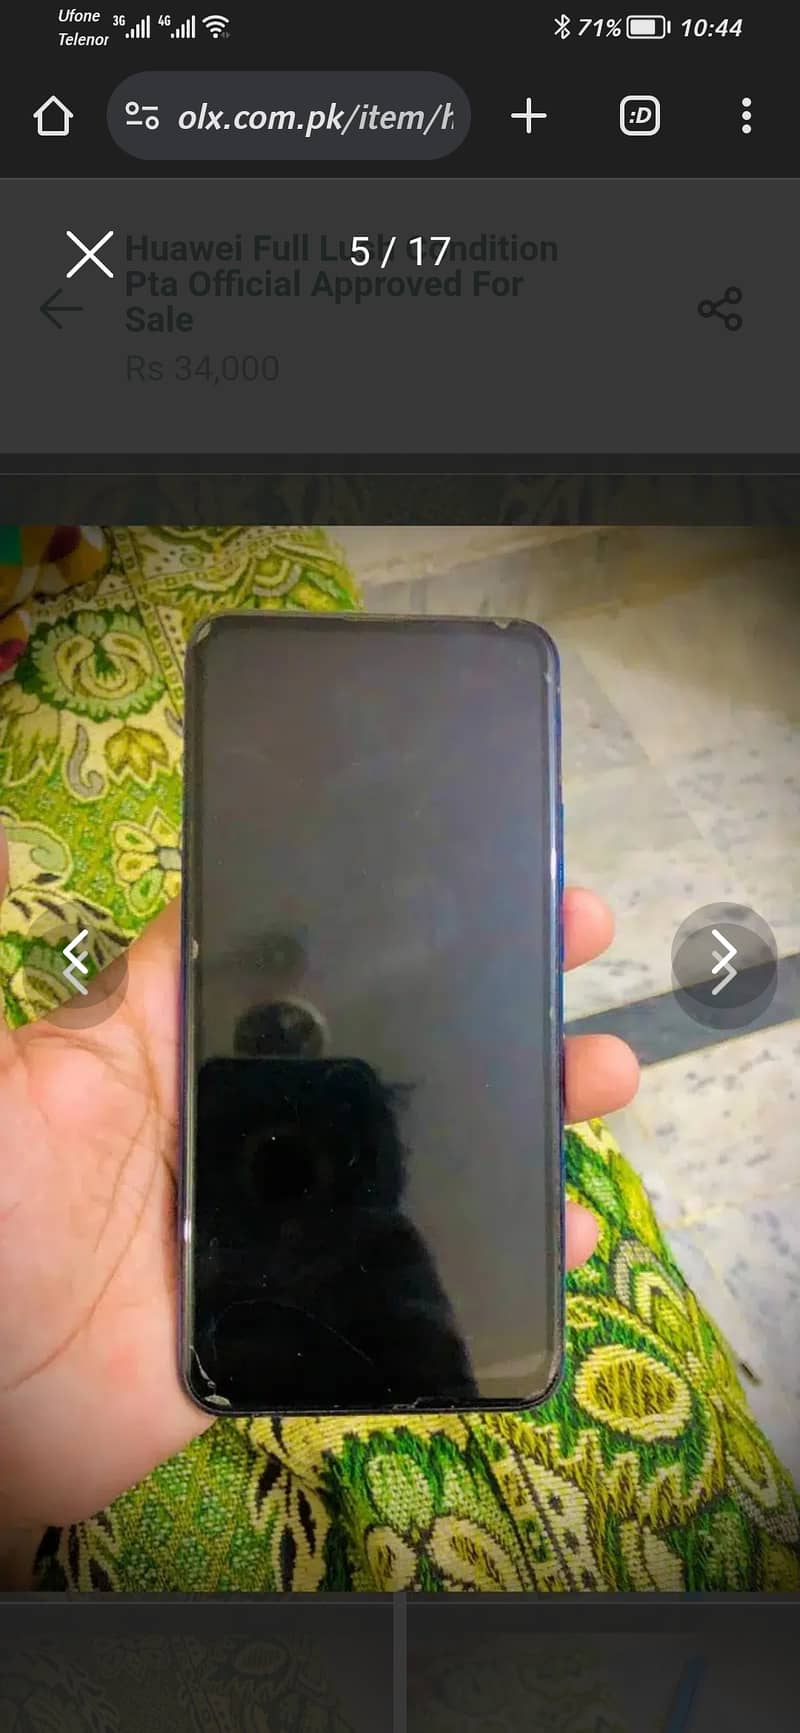 Huawei full lush condition pta official approved for sale 03405247206 9